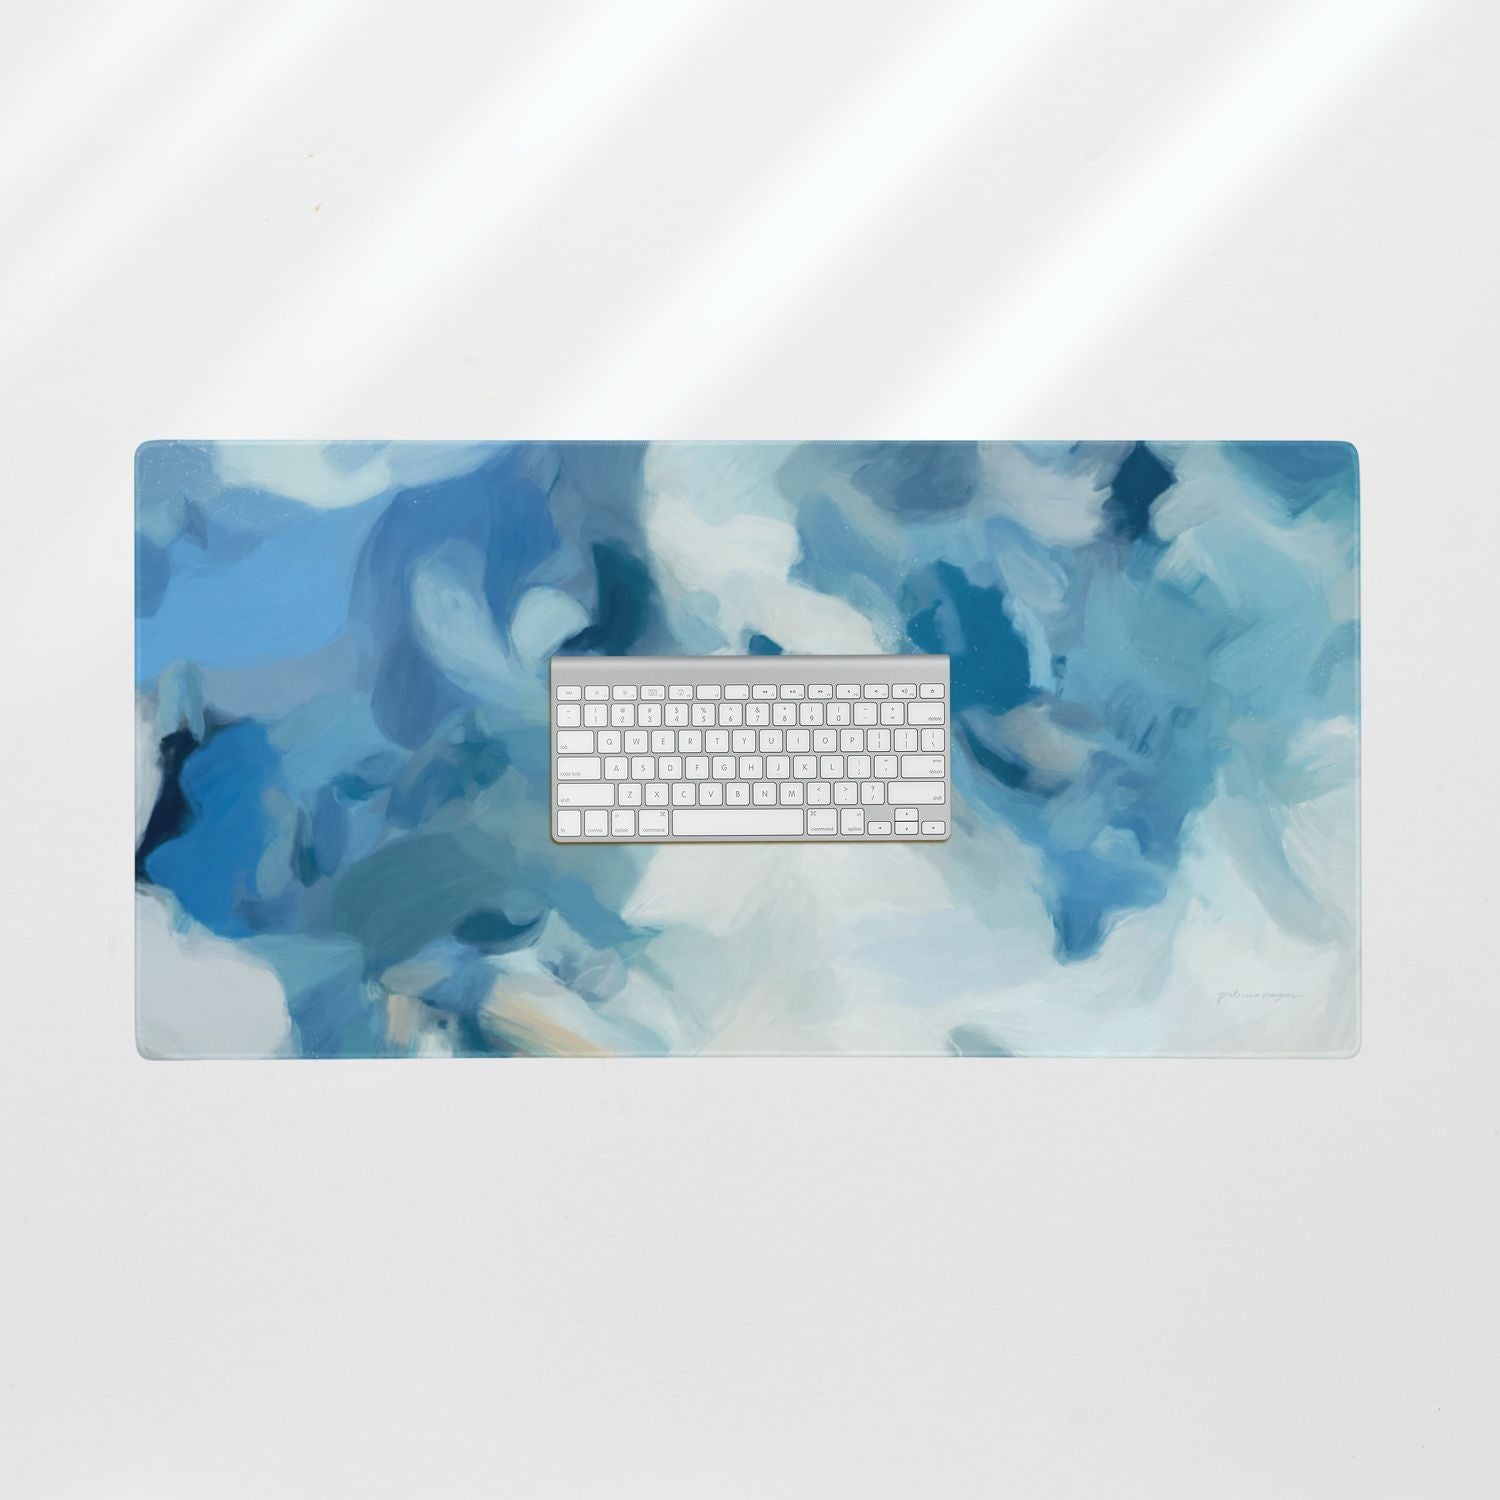 Liviana, blue desk pad for styling your office desk. Featuring artwork by Parima Studio. Home office styling accessories, cubicle styling accessories.